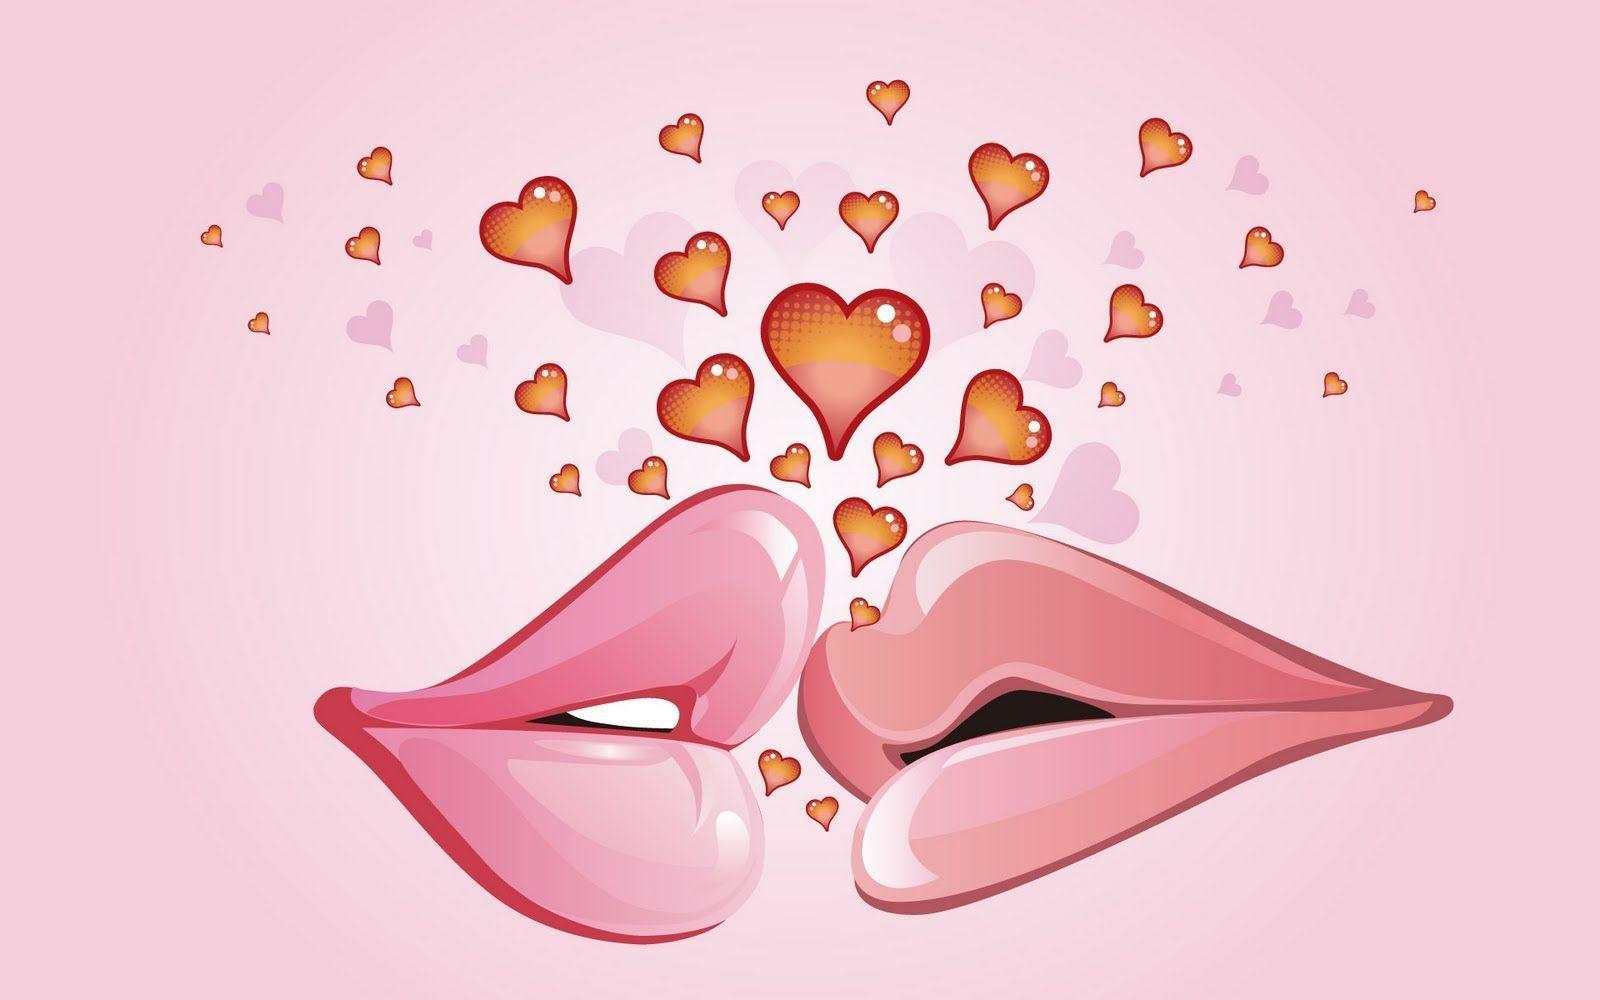 GALLERY FUNNY GAME: Free download love wallpaper